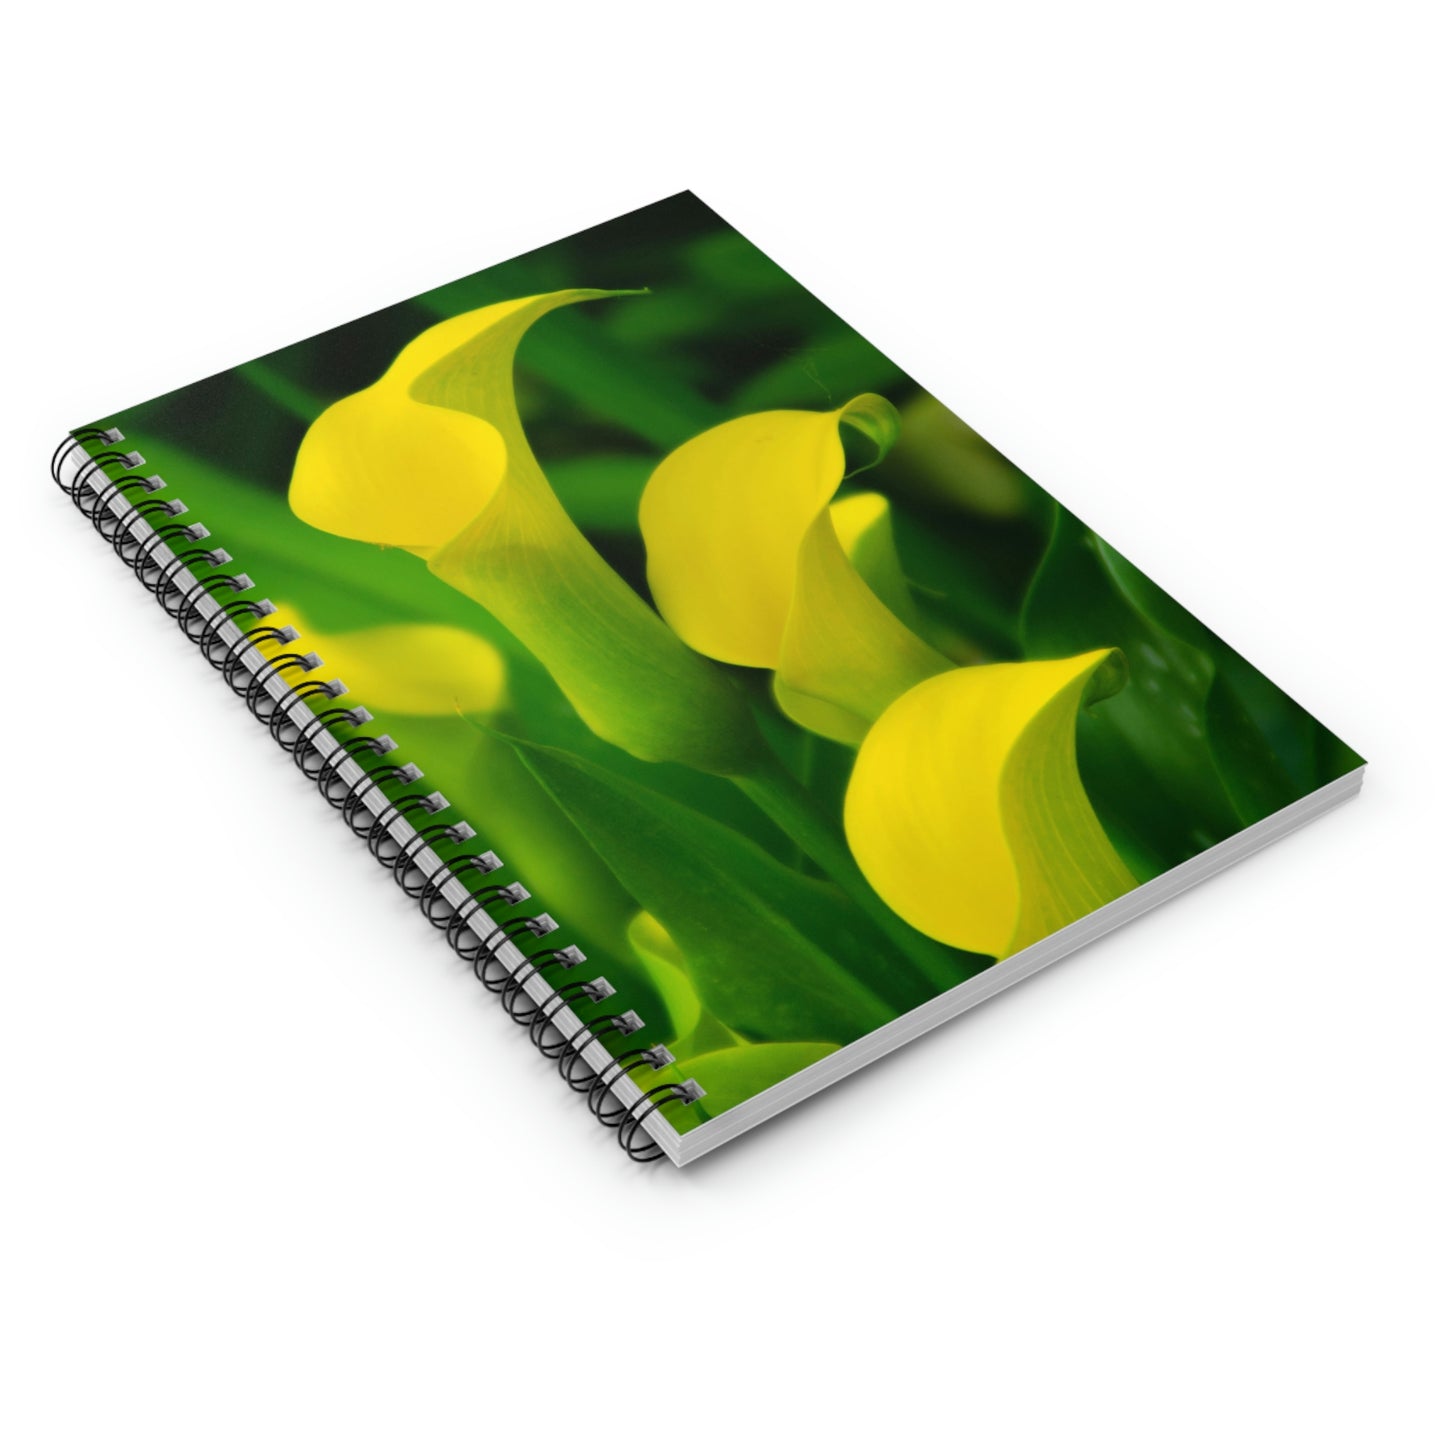 Flowers 33 Spiral Notebook - Ruled Line